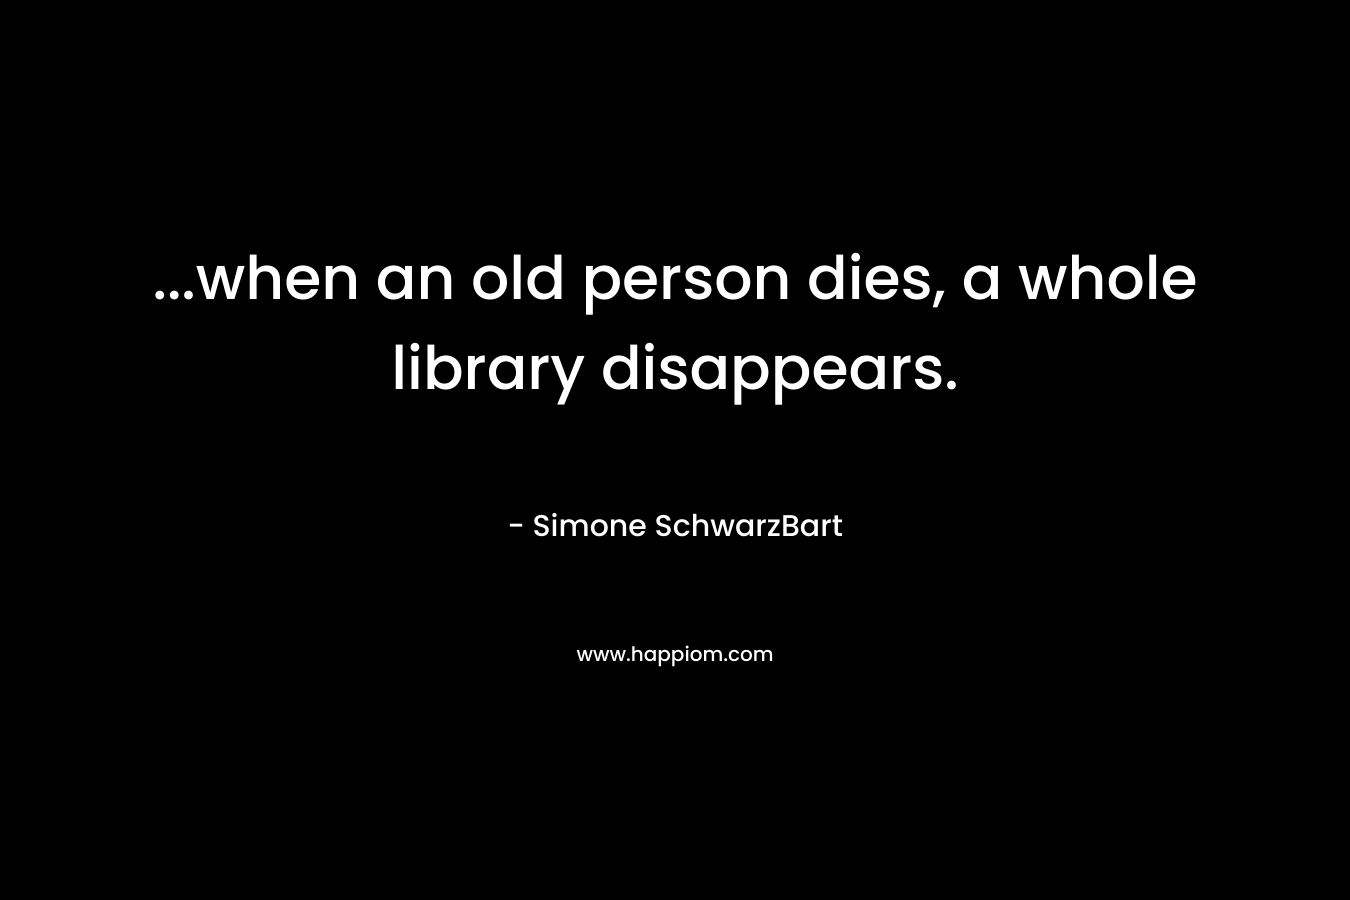 …when an old person dies, a whole library disappears. – Simone SchwarzBart